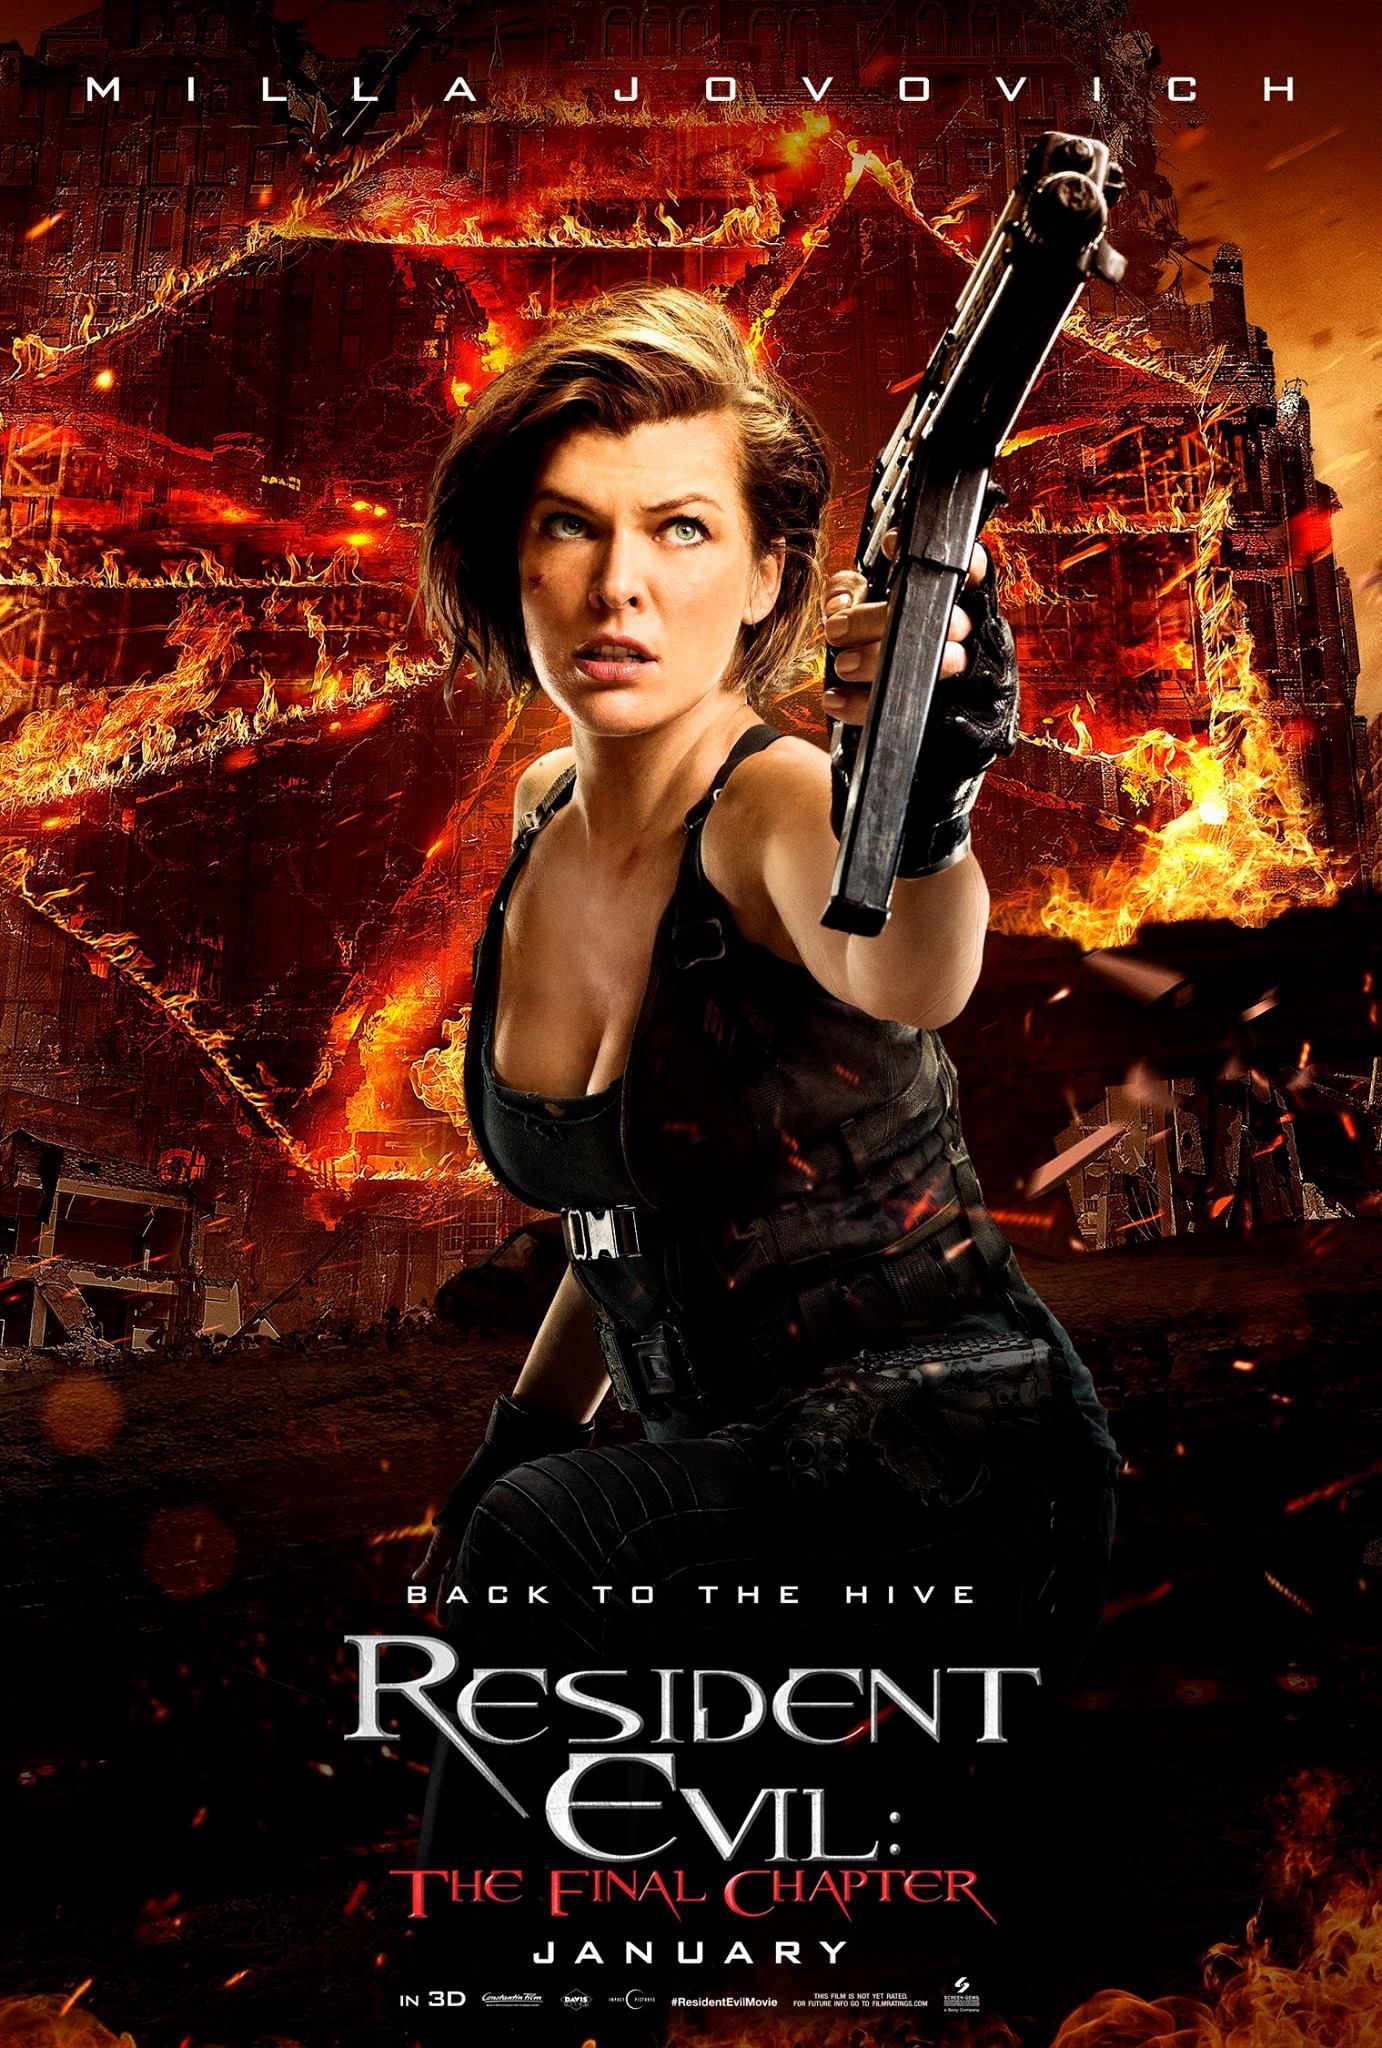 Resident Evil The Final Chapter - Milla Jovovich poster